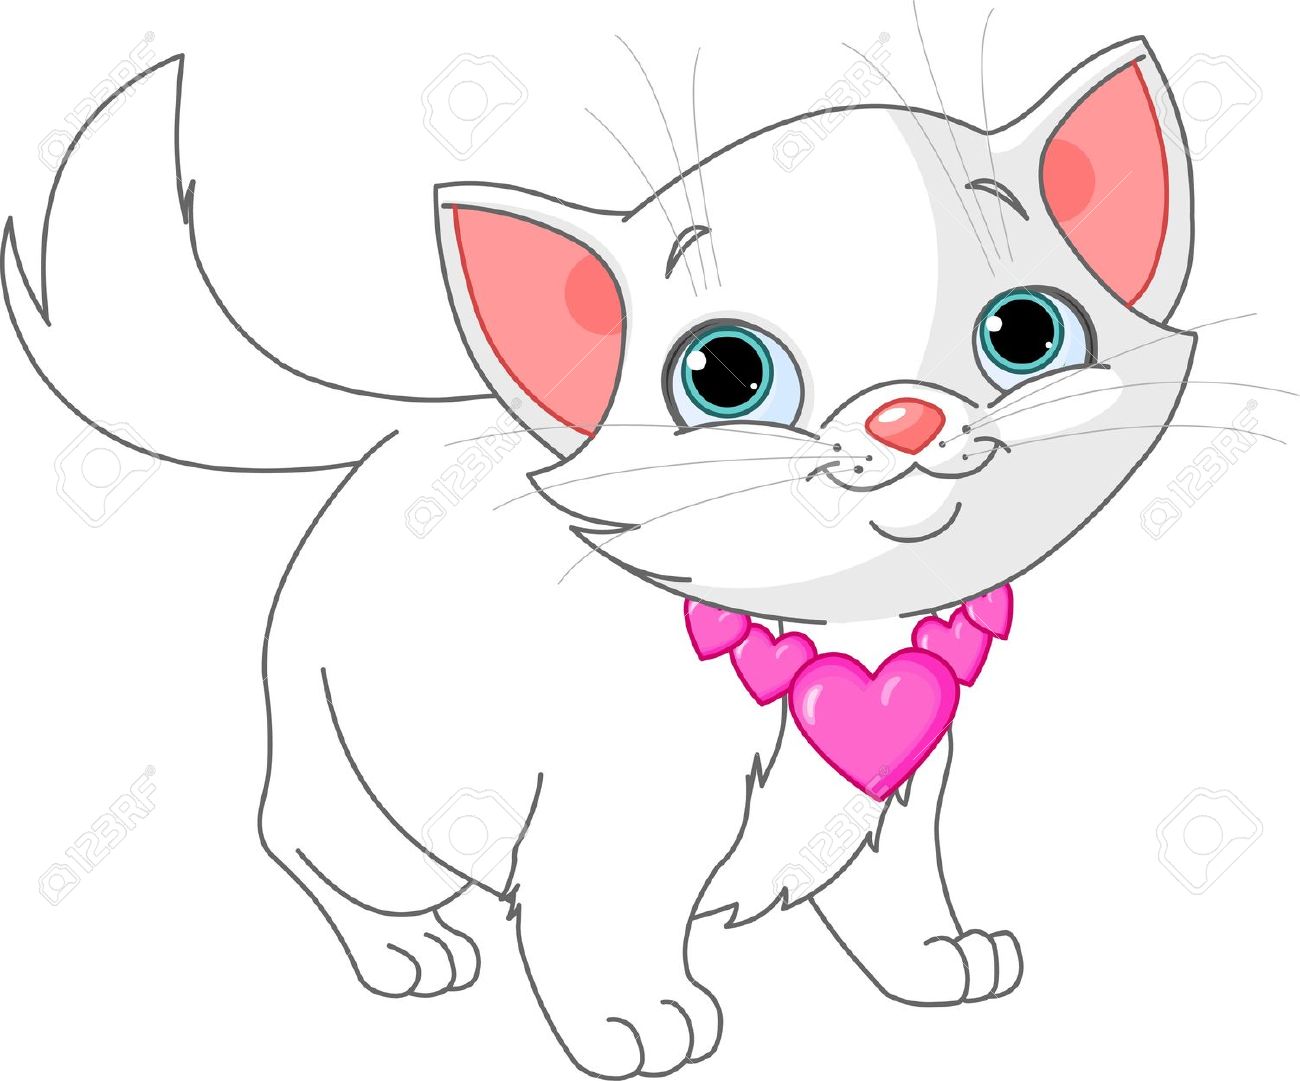 clipart pictures of kittens - photo #11